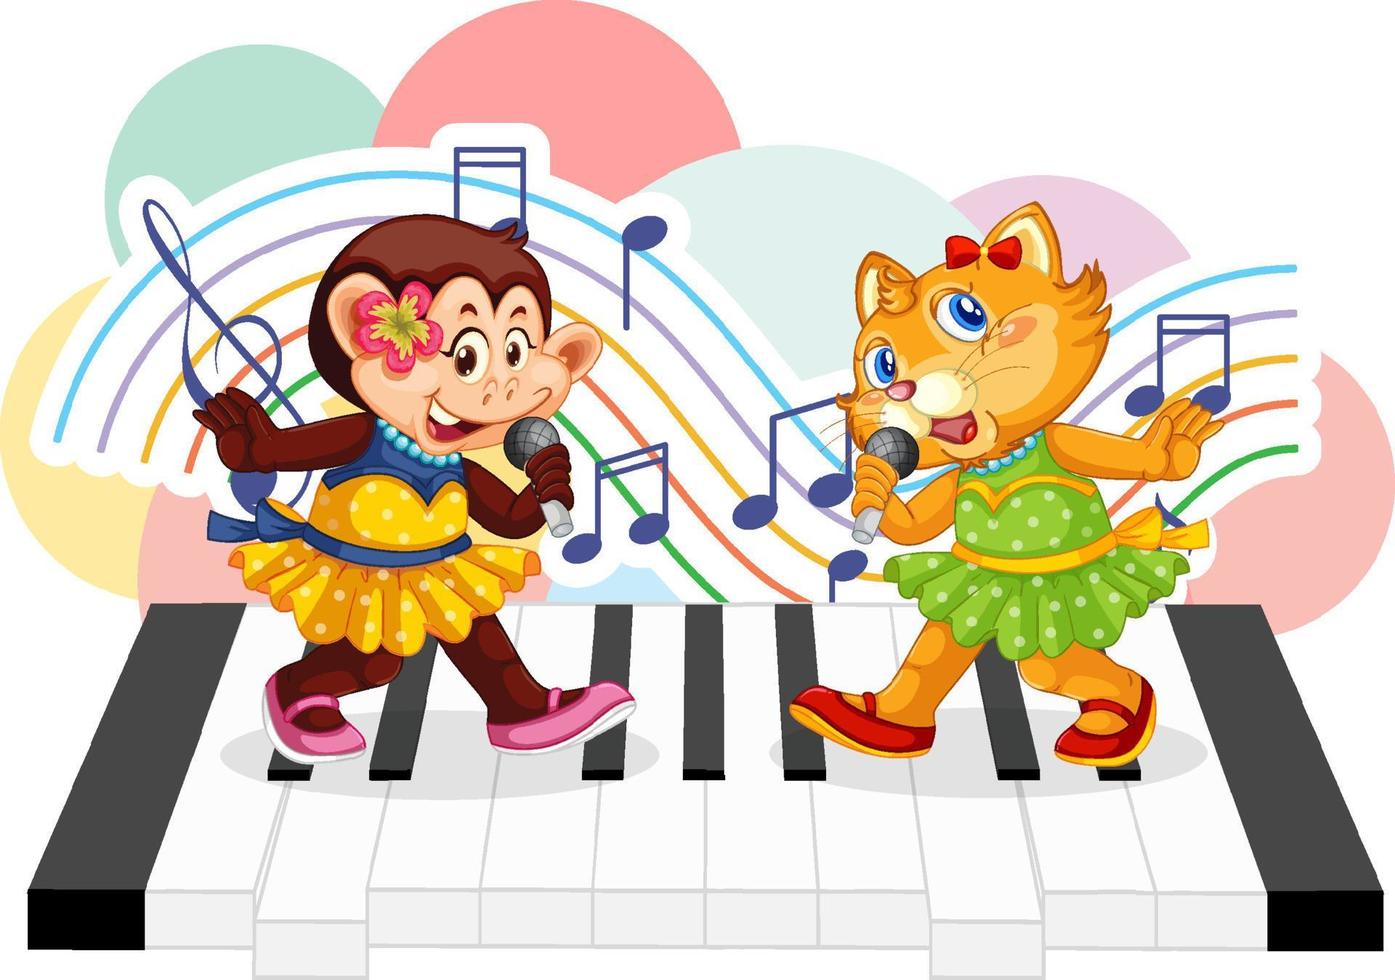 Cute animal sing a song with music notes on piano vector